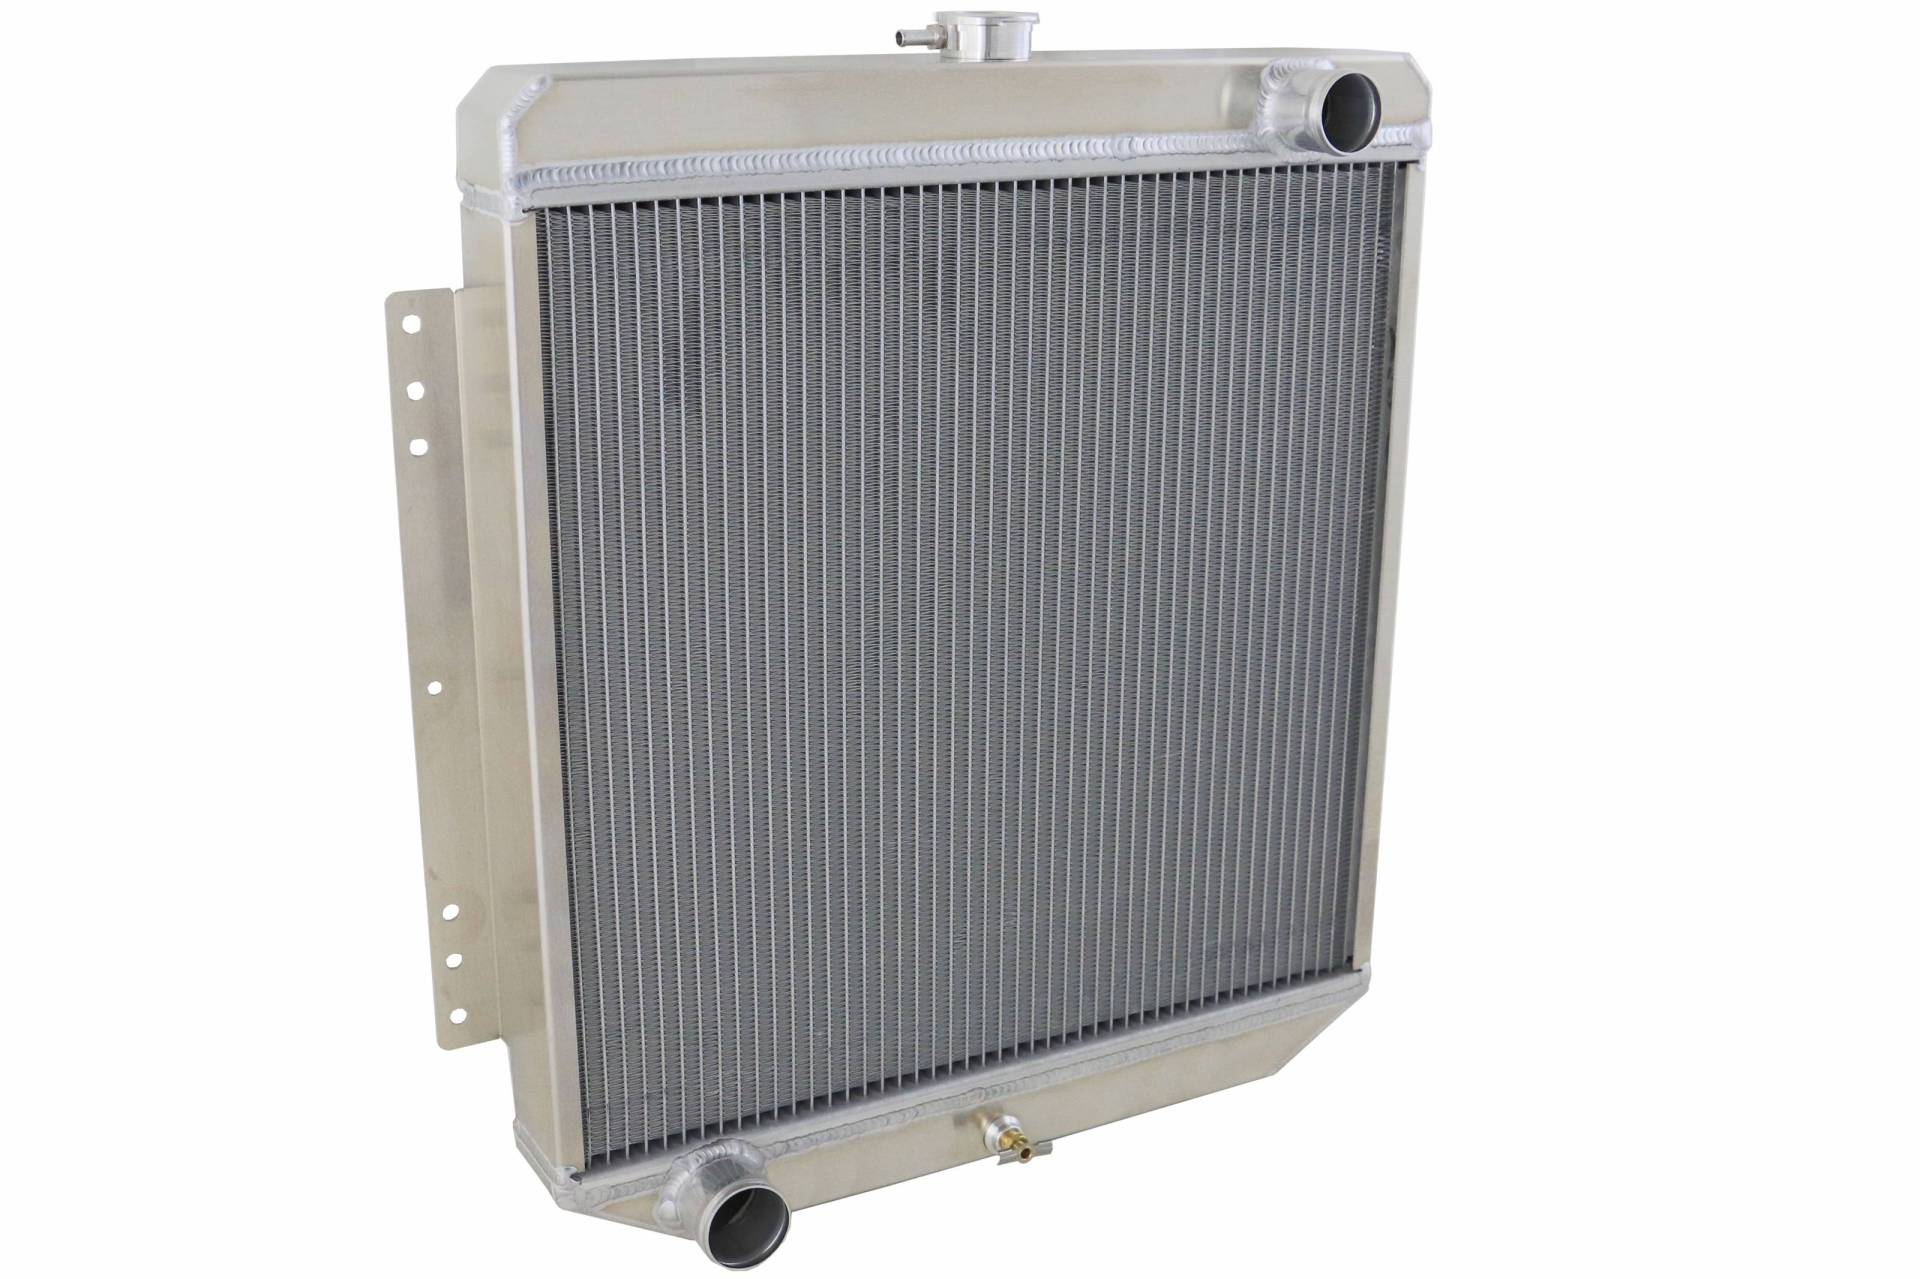 Wizard Cooling Inc - Wizard Cooling - 1956-57 Lincoln Aluminum Radiator - 41000-100